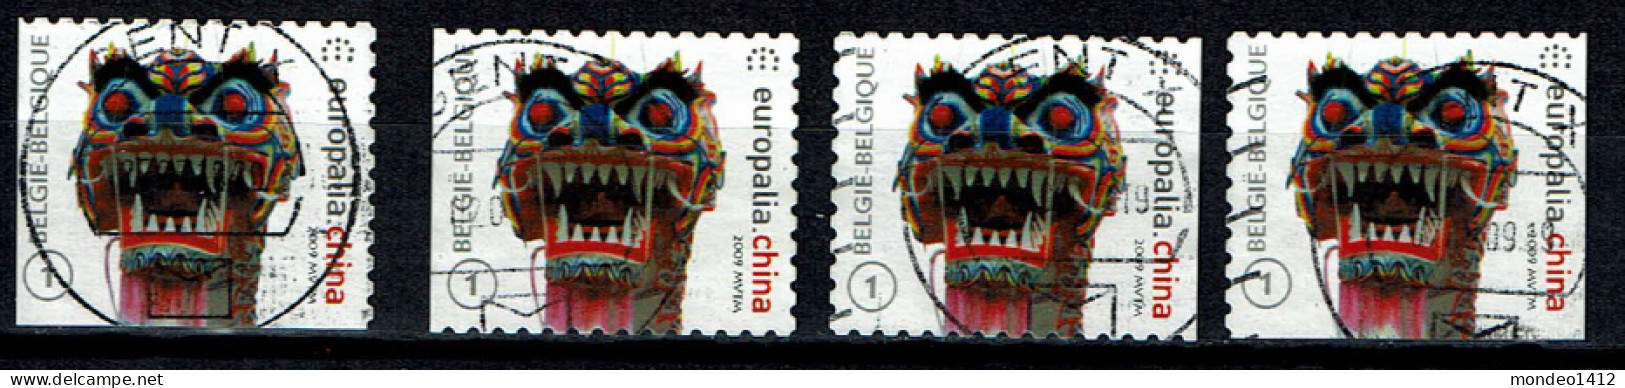 België OBP 3968 - Europalia 2009 - Self Adhesive Stamp From Booklet  Complete - Usados